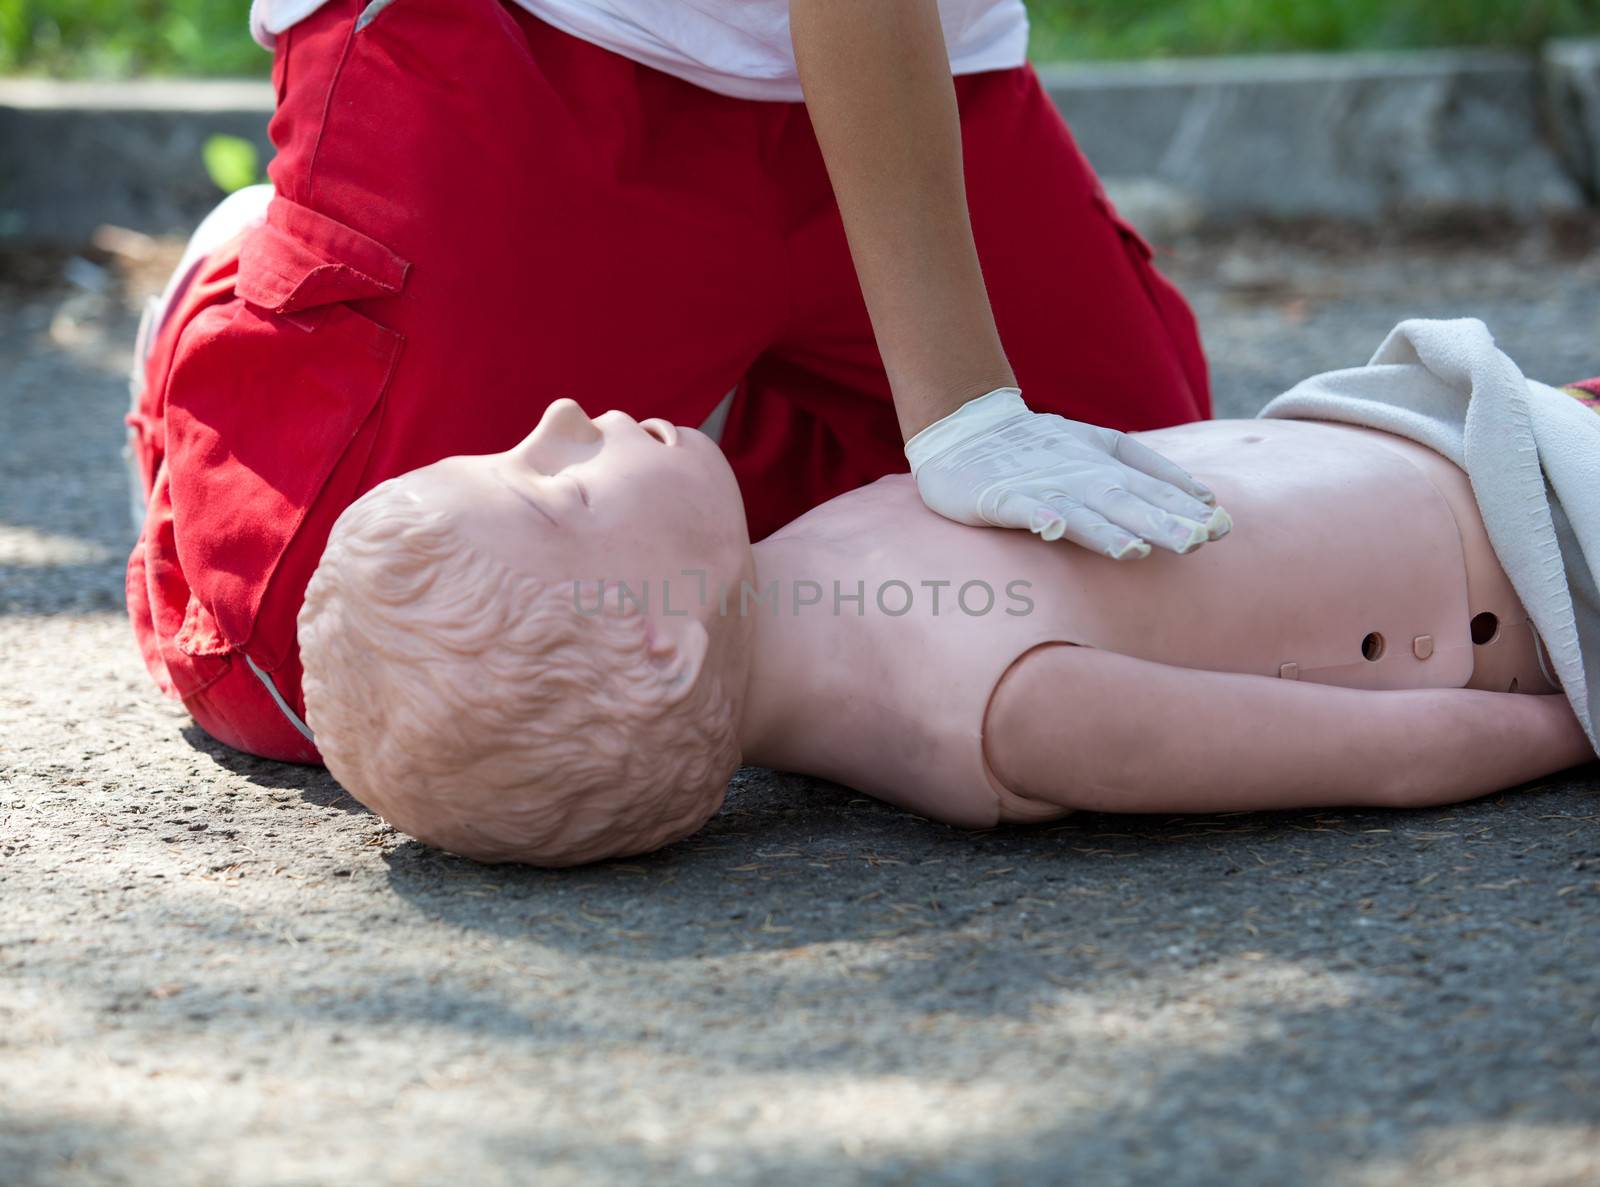 CPR training by wellphoto